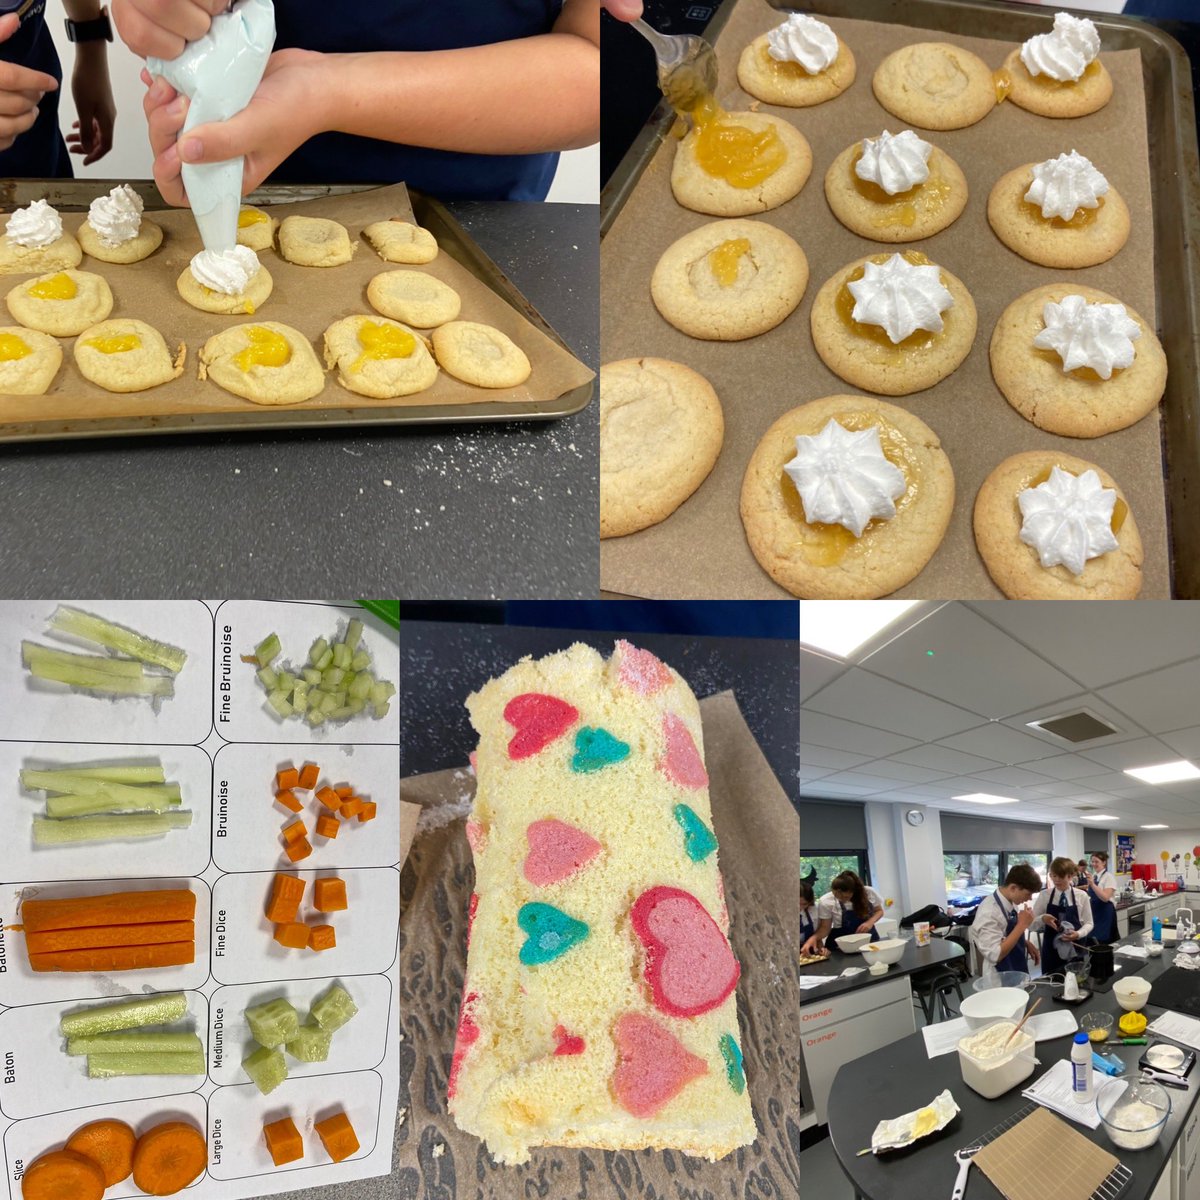 It’s been AMAZING to have students back and cooking in F1 this week!! 👏🏼🥰👌🏼 #bake #cookies #swissroll #vegetableprep @TGS_Food